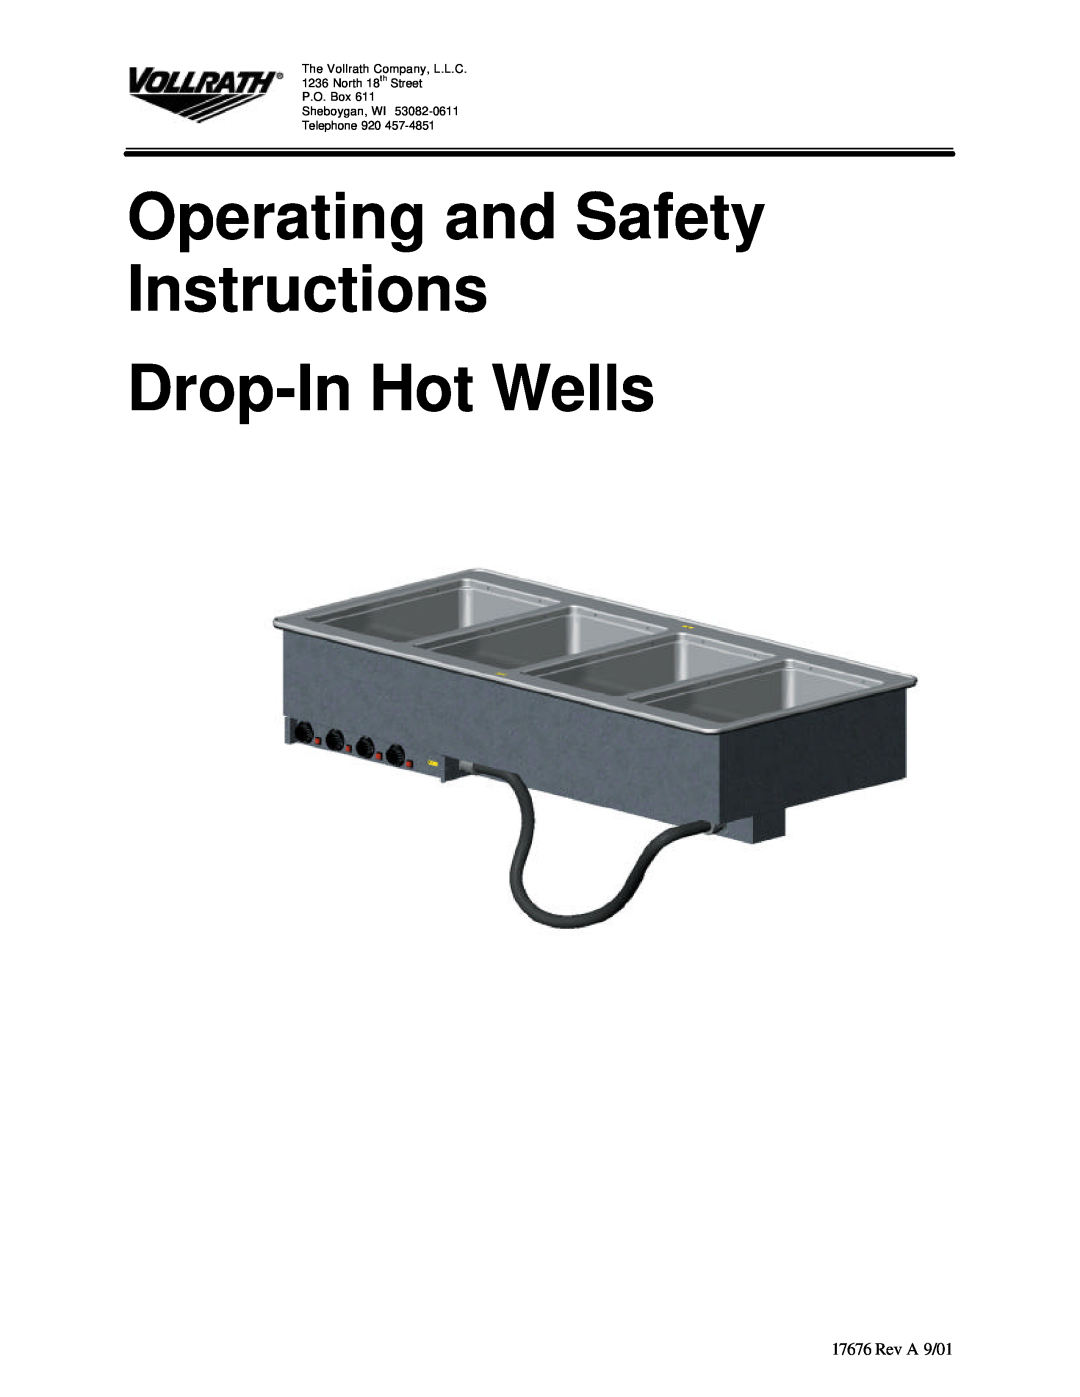 The Vollrath Co Drop-In Hot Wells manual Operating and Safety Instructions, Drop-InHot Wells, Rev A 9/01, Telephone 